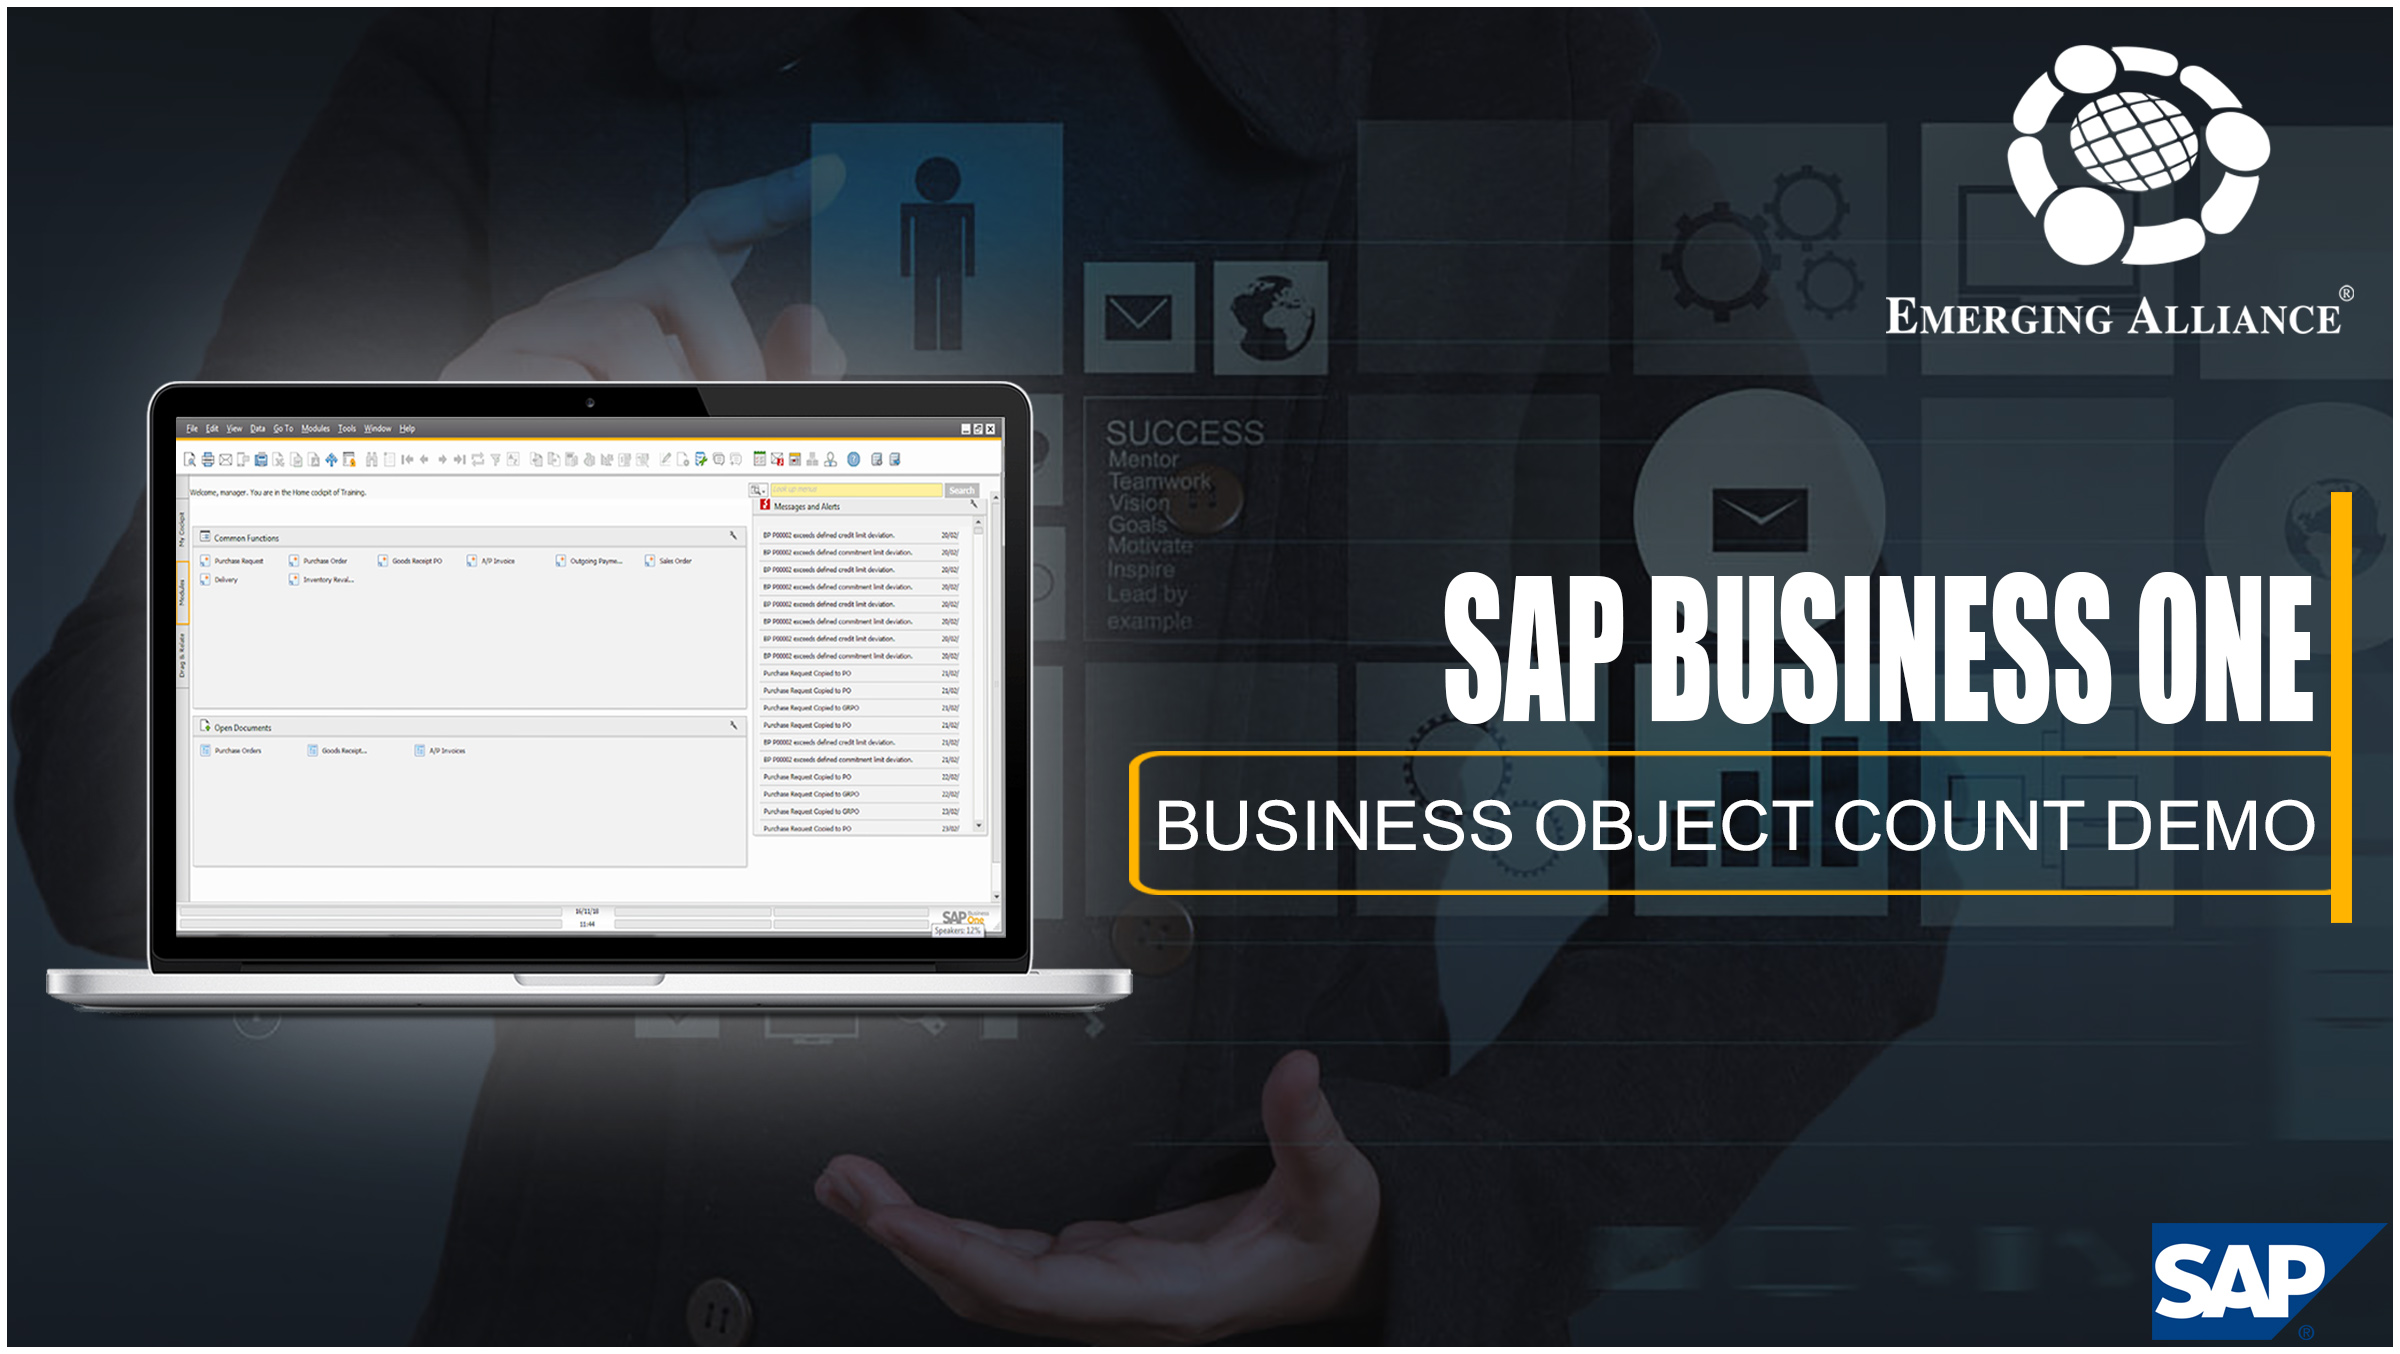 SAP B1 BUSINESS OBJECT COUNT